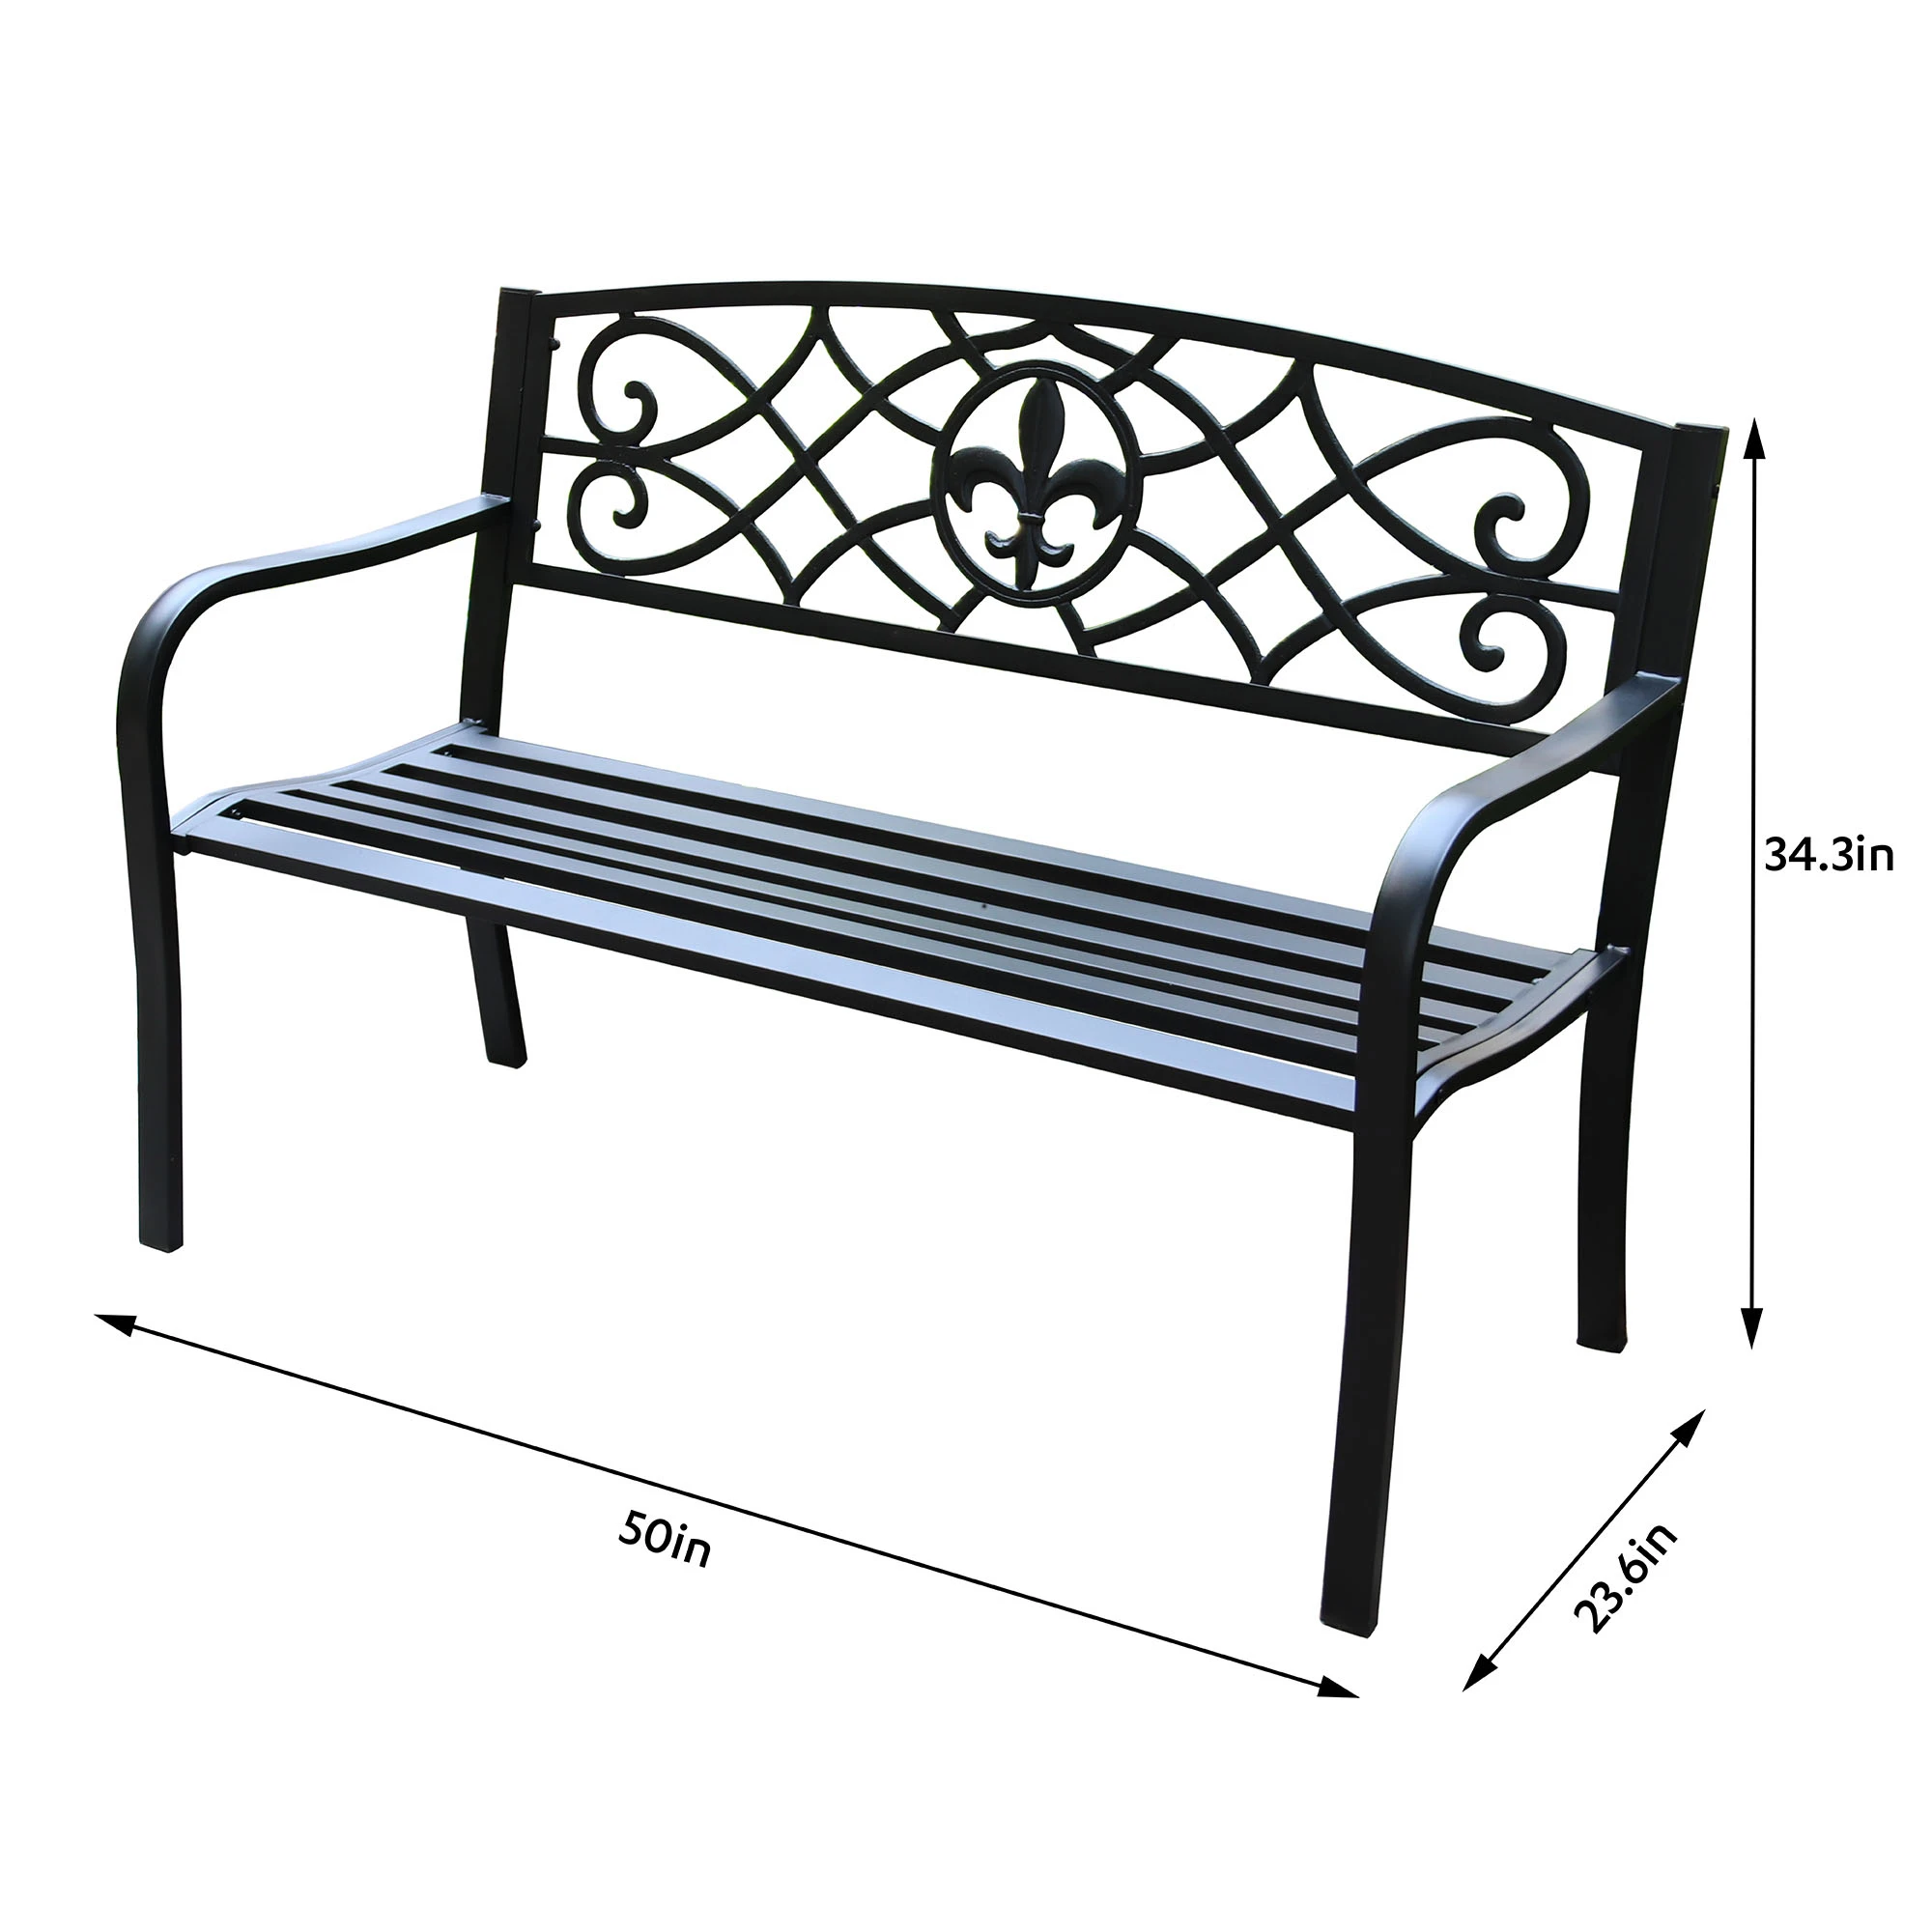 Best Selling Top Quality Garden Lounge Chair Garden Benches Metal Park Outdoor Steel Benches